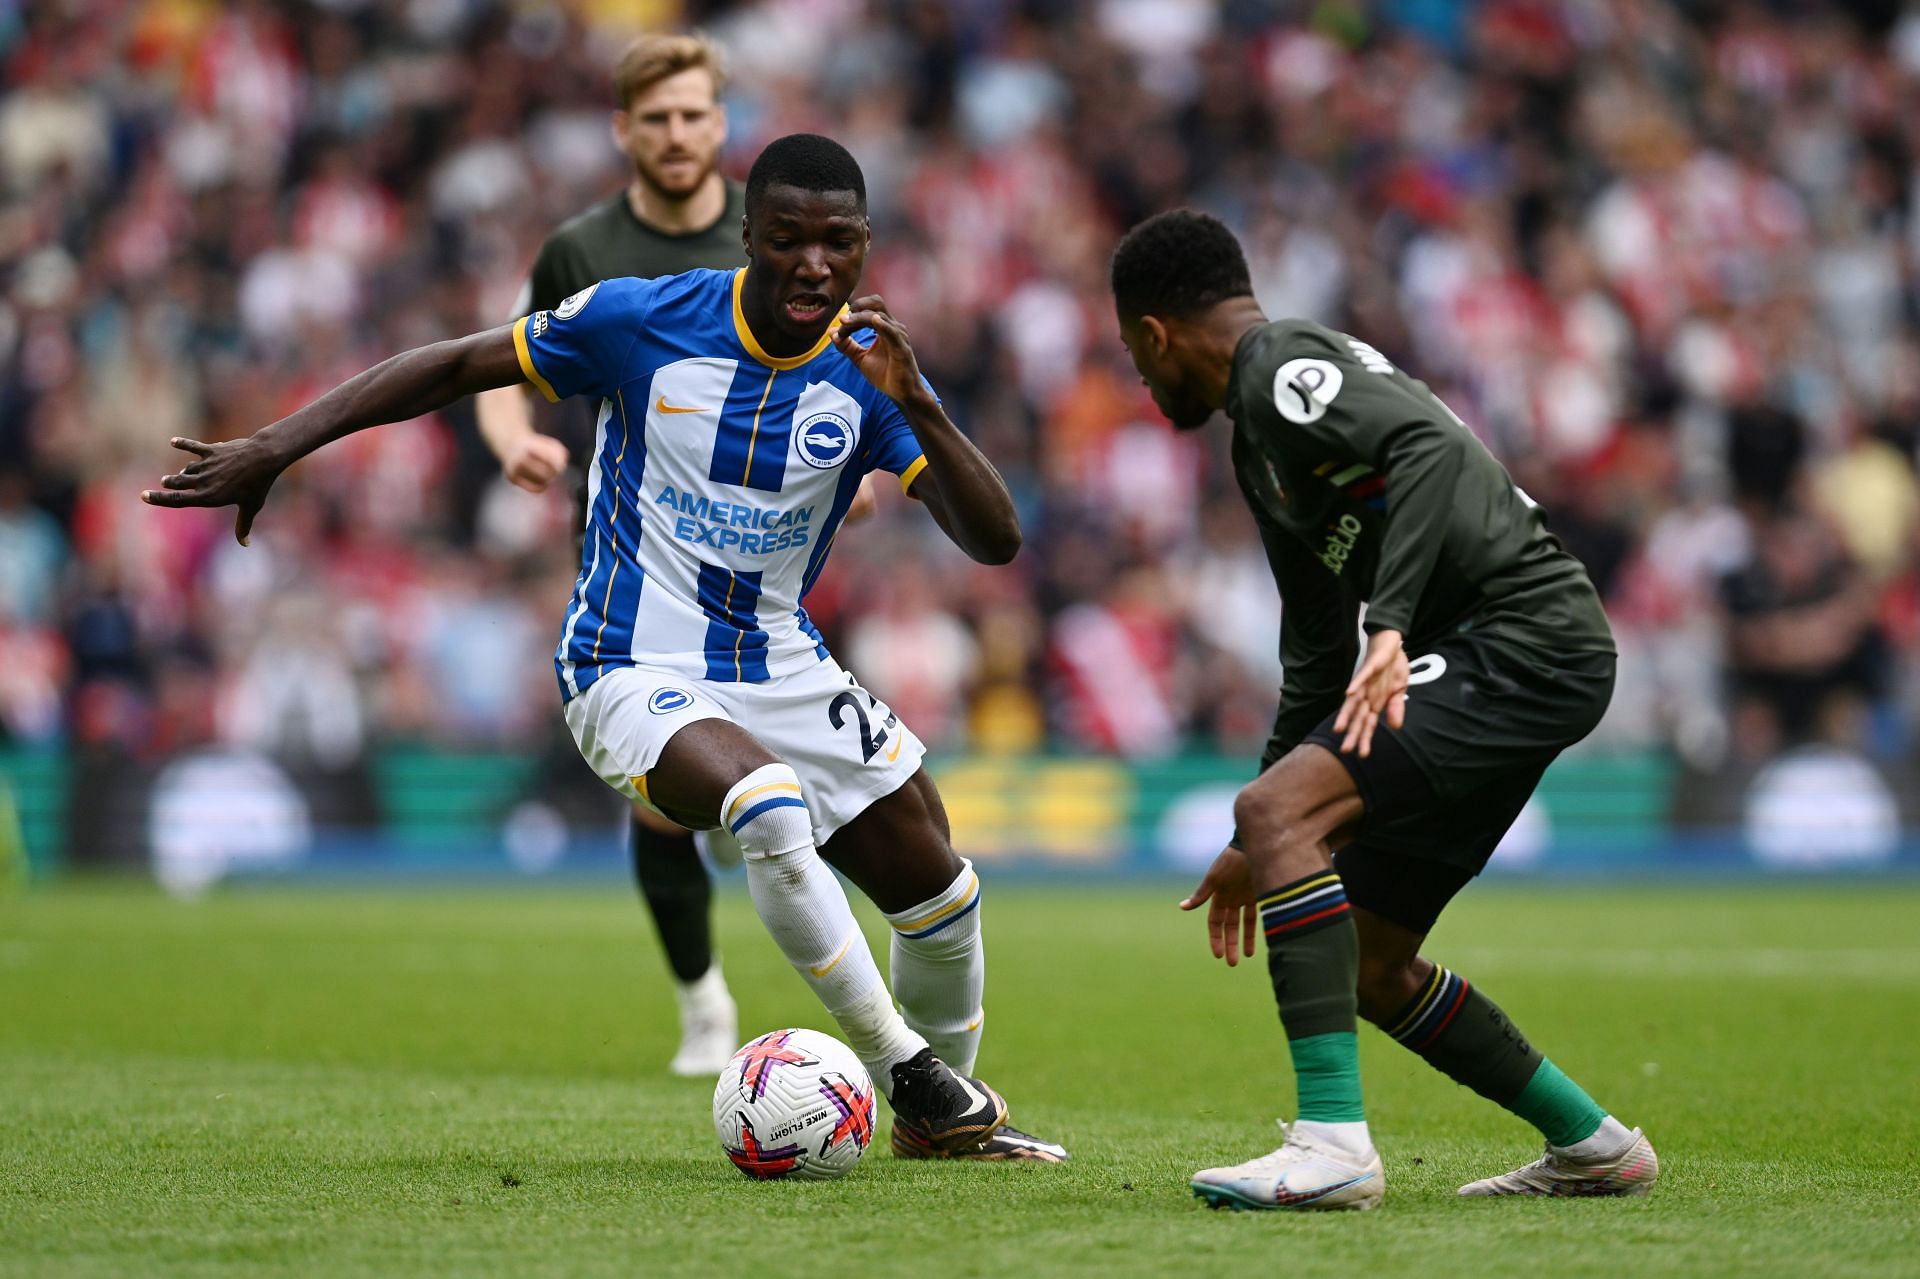 Moises Caicedo is eager to move to Stamford Bridge.